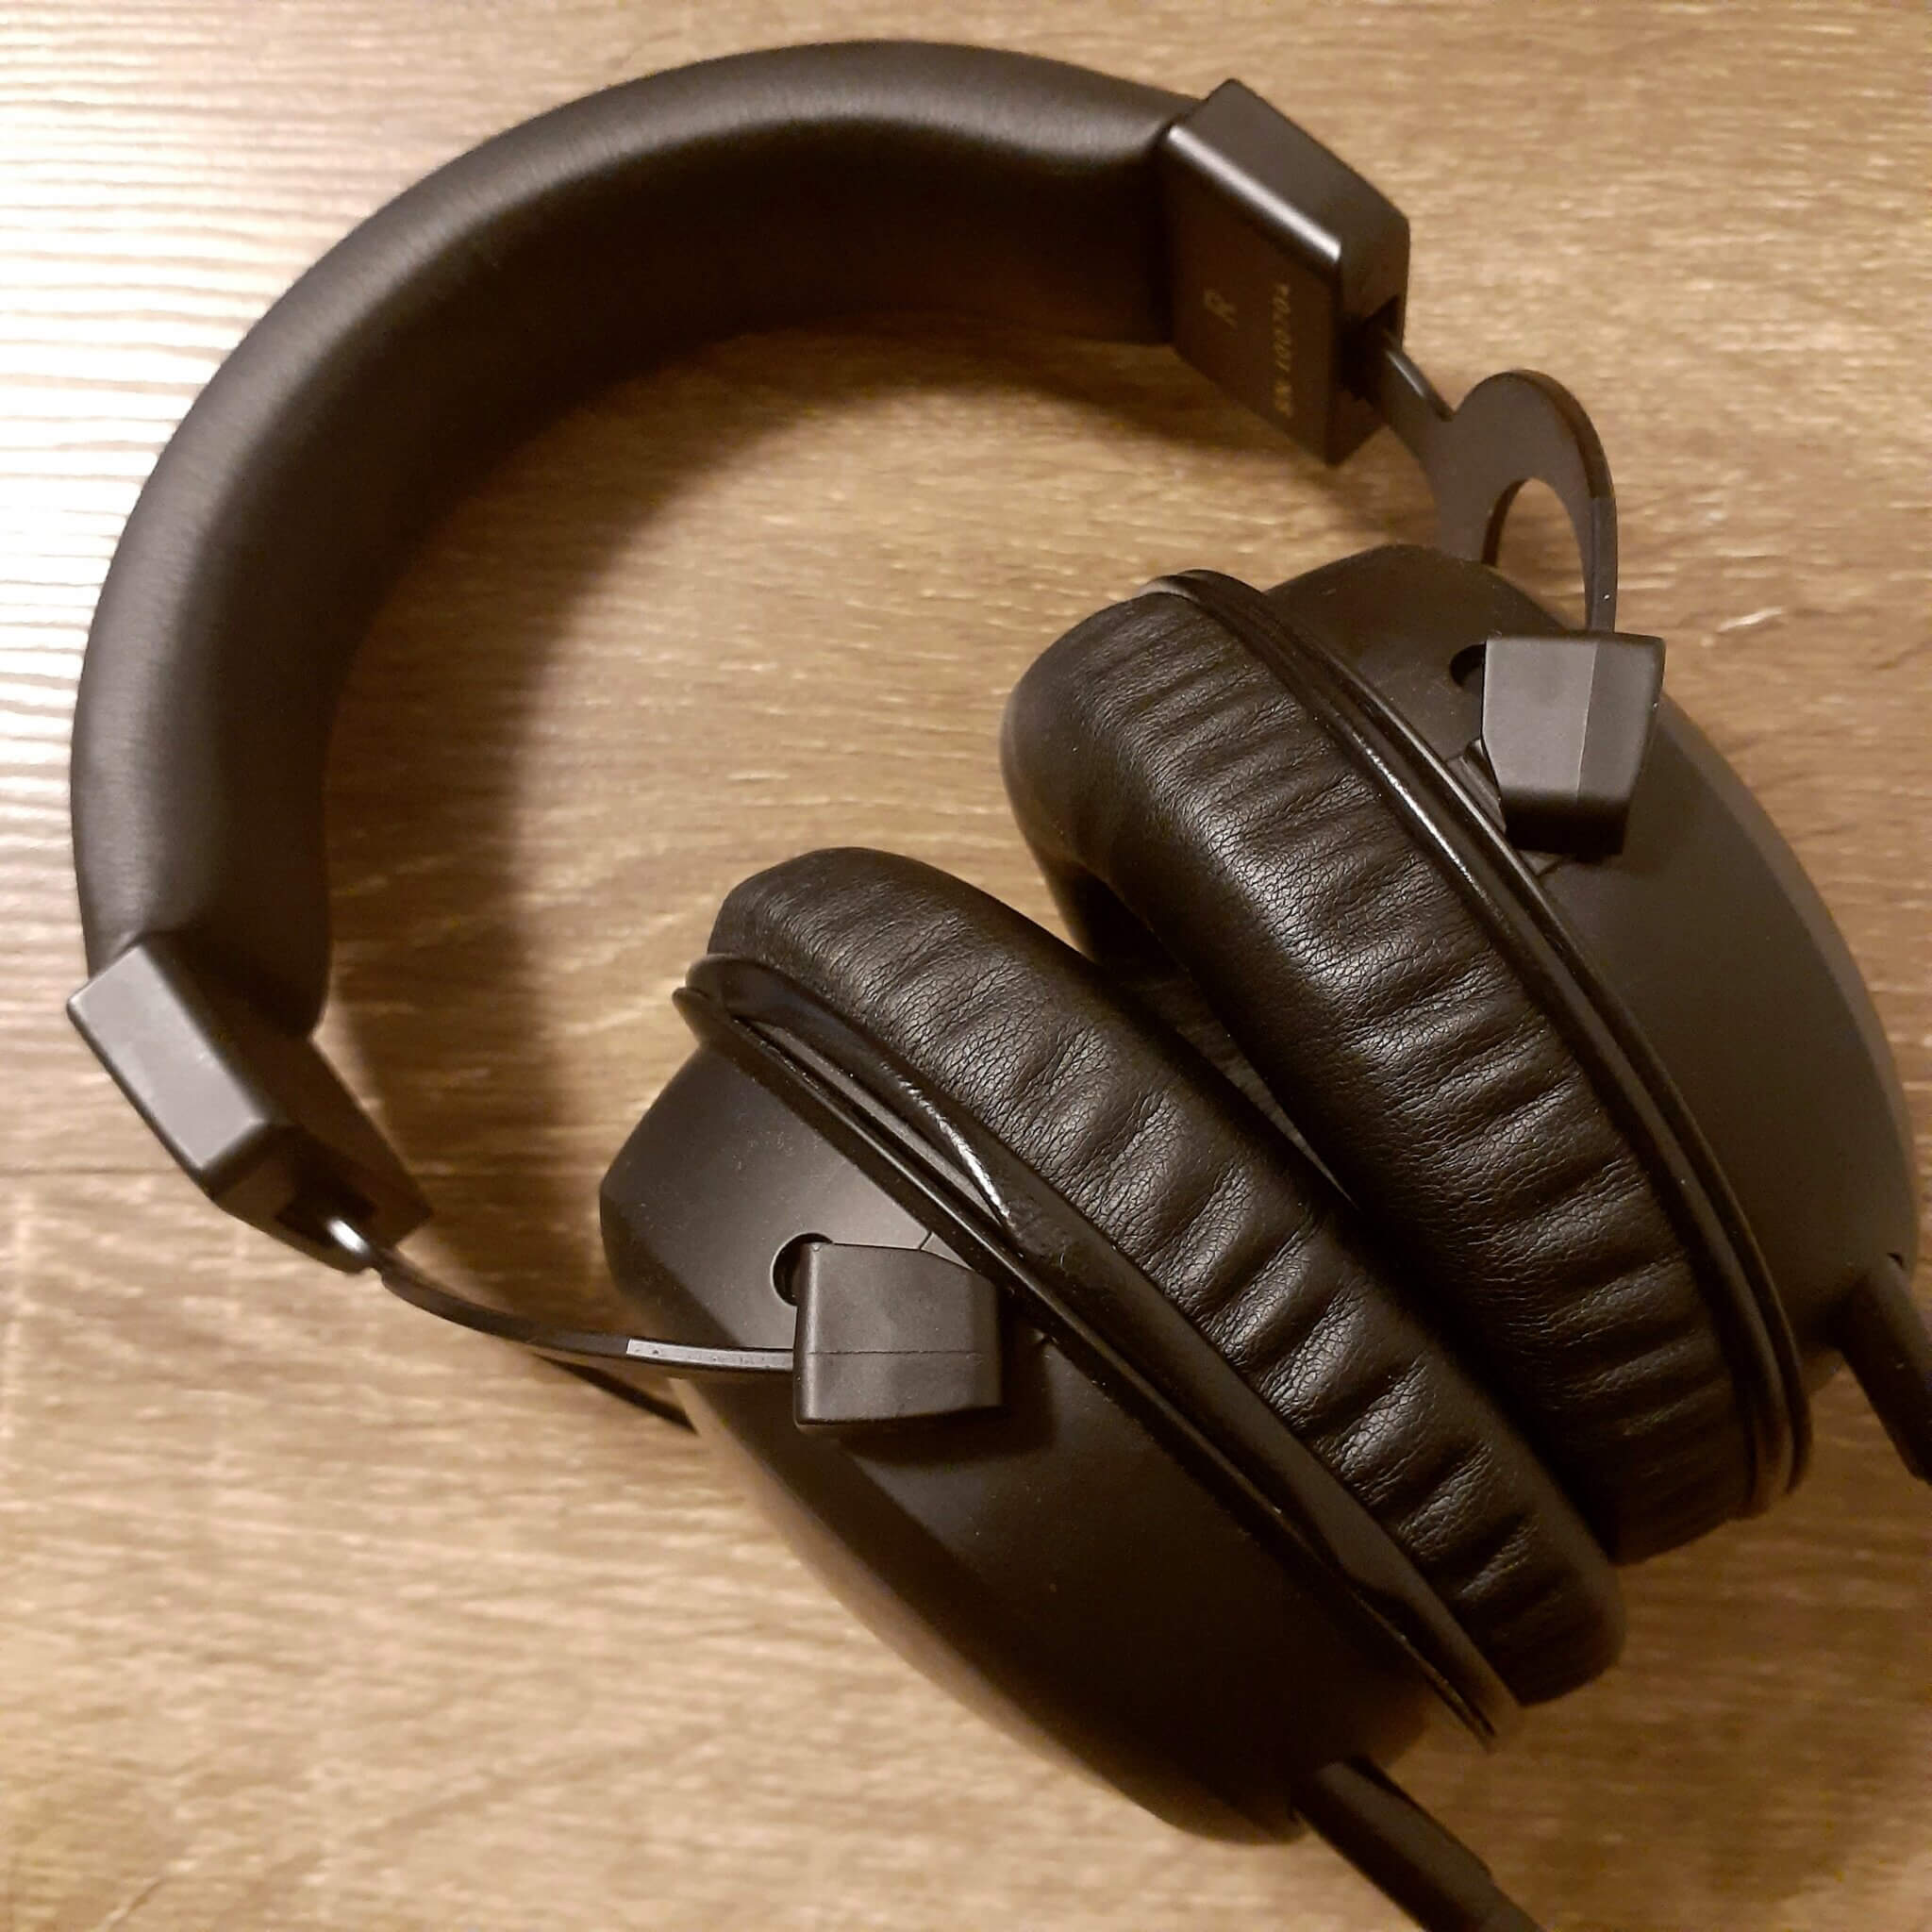 beyerdynamic T5 3rd Generation: If you like a spacious and deep 